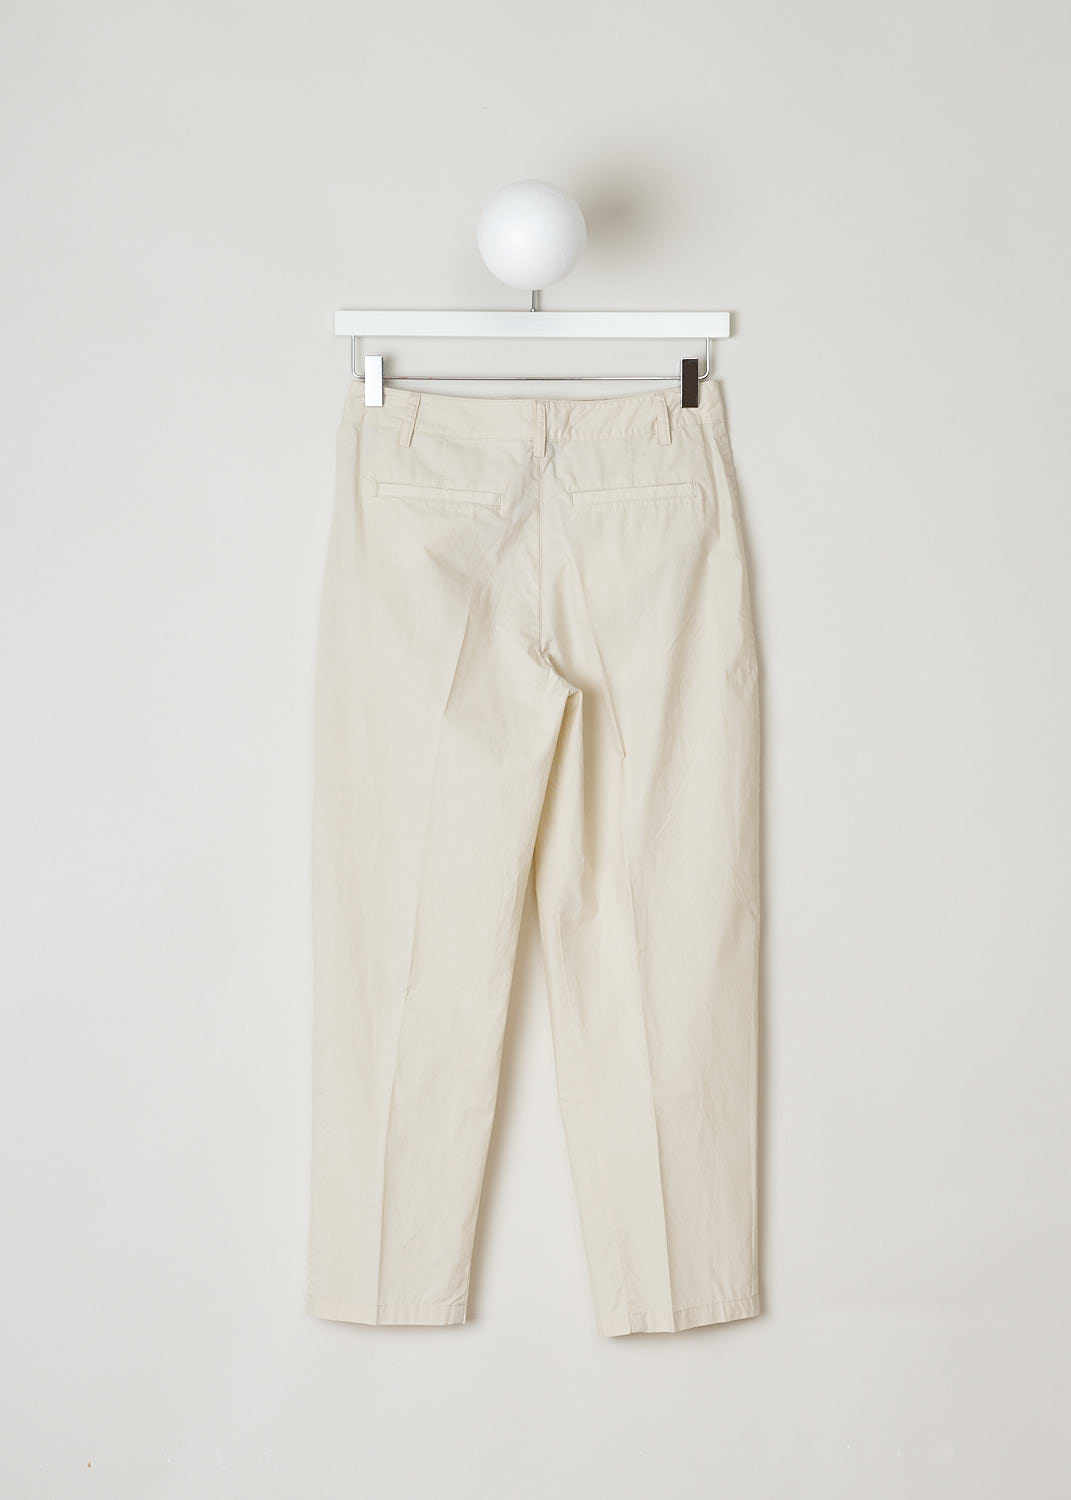 CLOSED, LIGHTWEIGHT BEIGE TROUSERS, LUDWIG_C9145_53A_22_259, Beige, back, These lightweight beige trousers feature a regular length, two forward slanted pockets on the front and two welt pockets on the back.